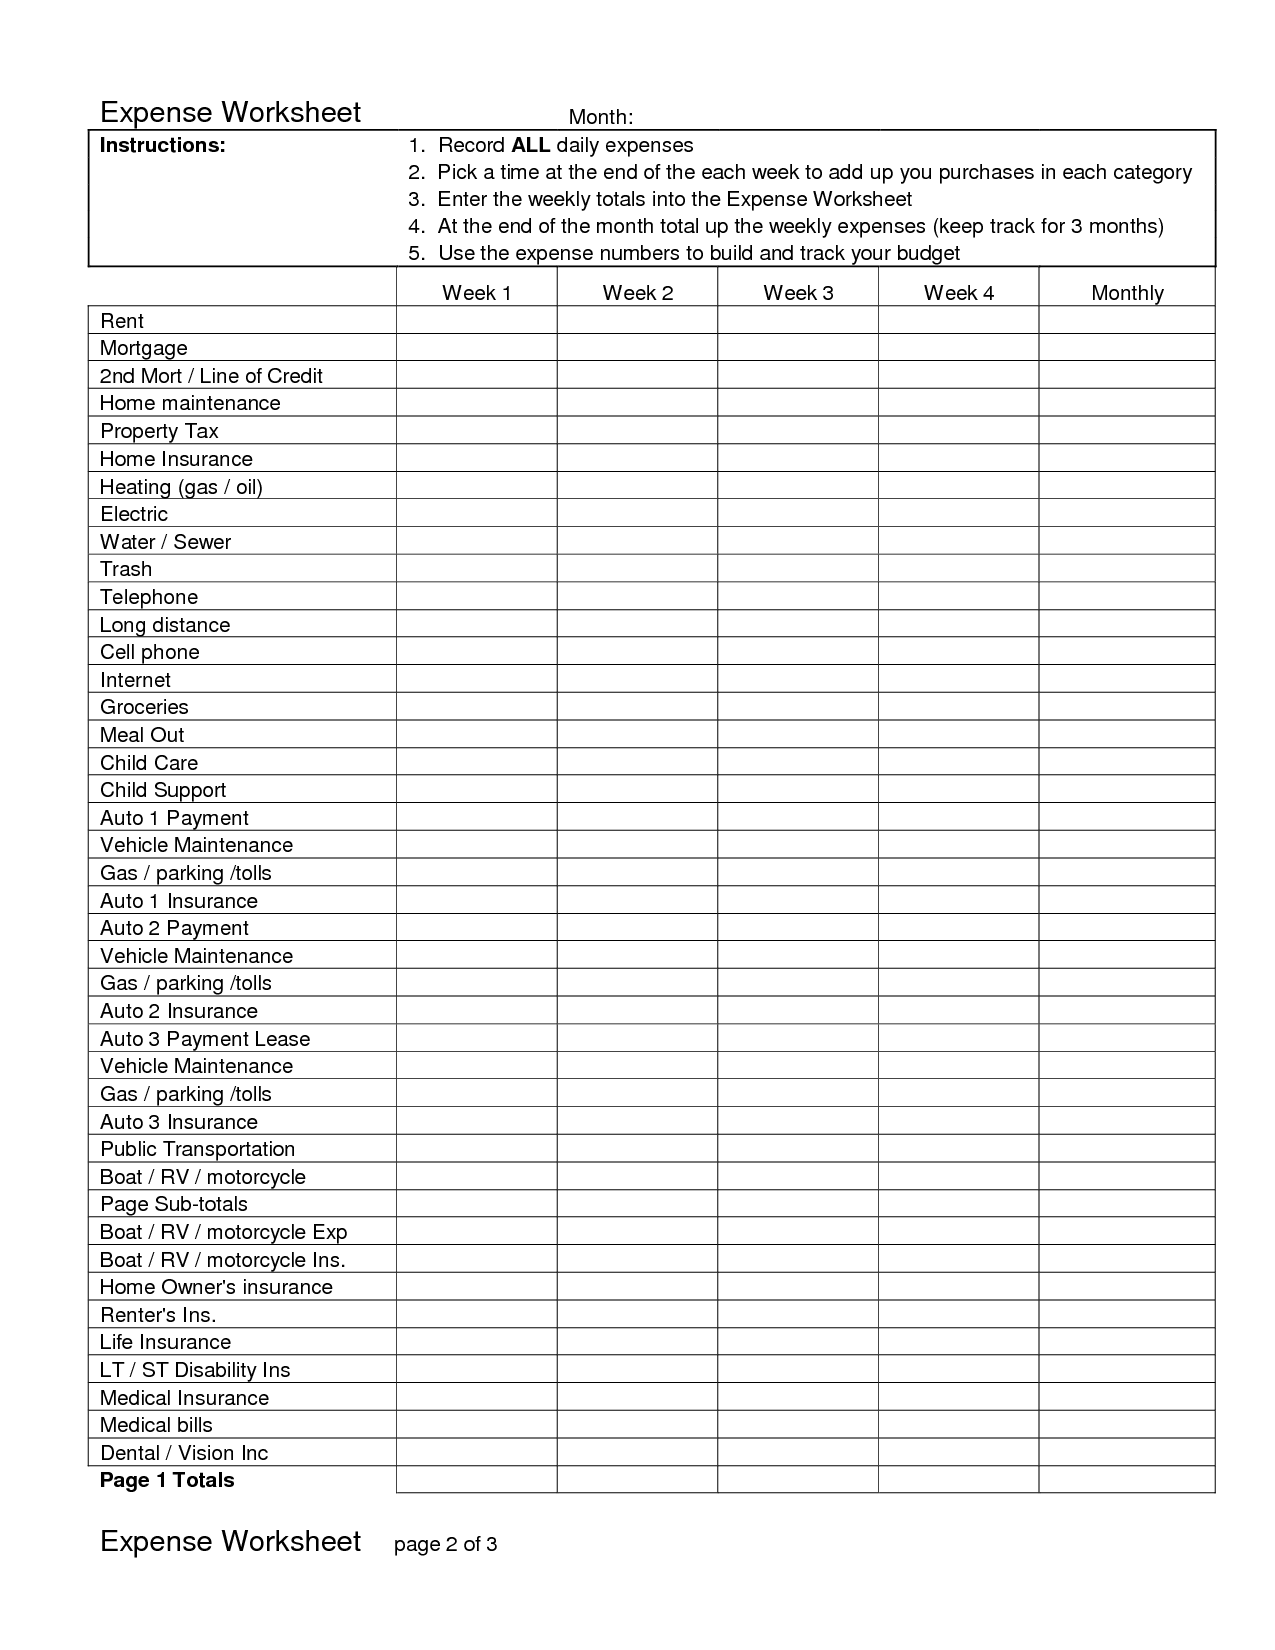 monthly-business-expense-worksheet